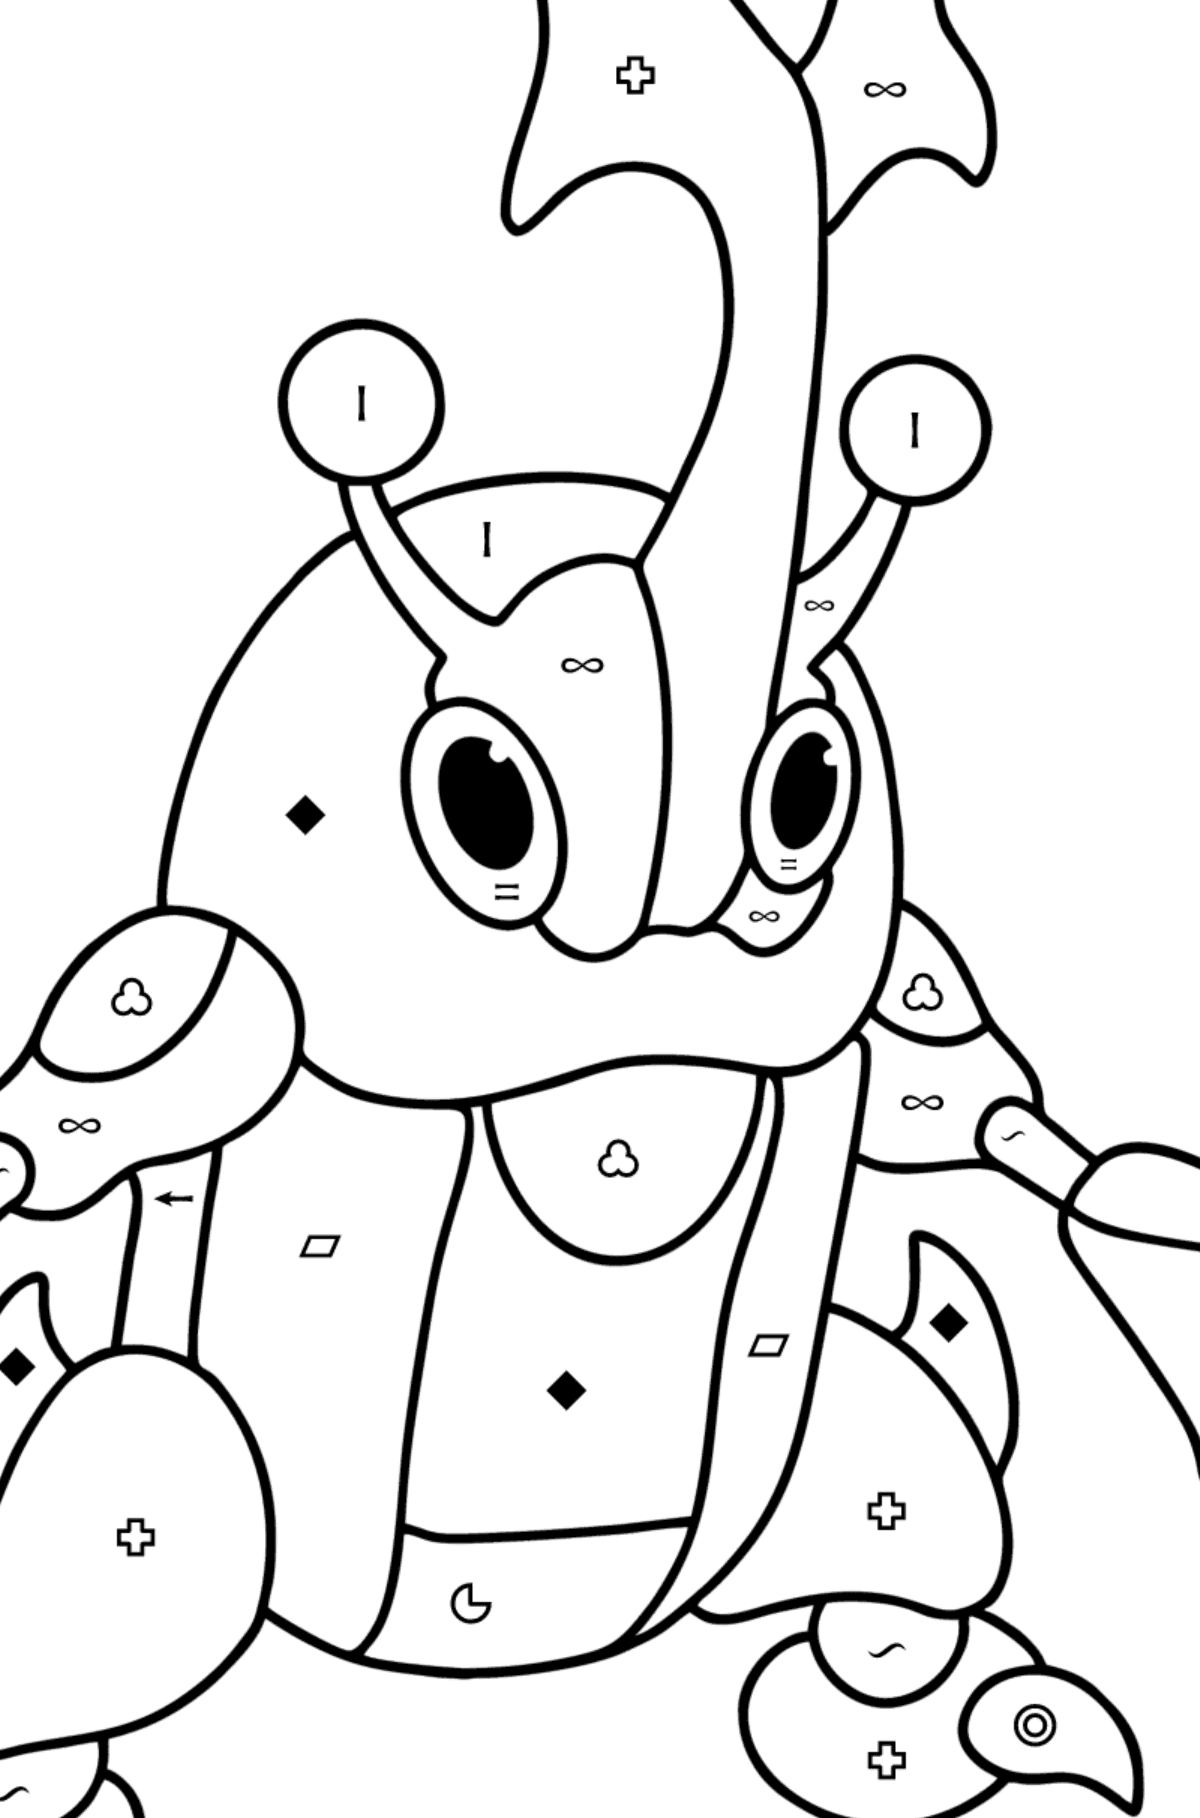 Colouring page Pokémon X and Y Heracross - Coloring by Symbols and Geometric Shapes for Kids